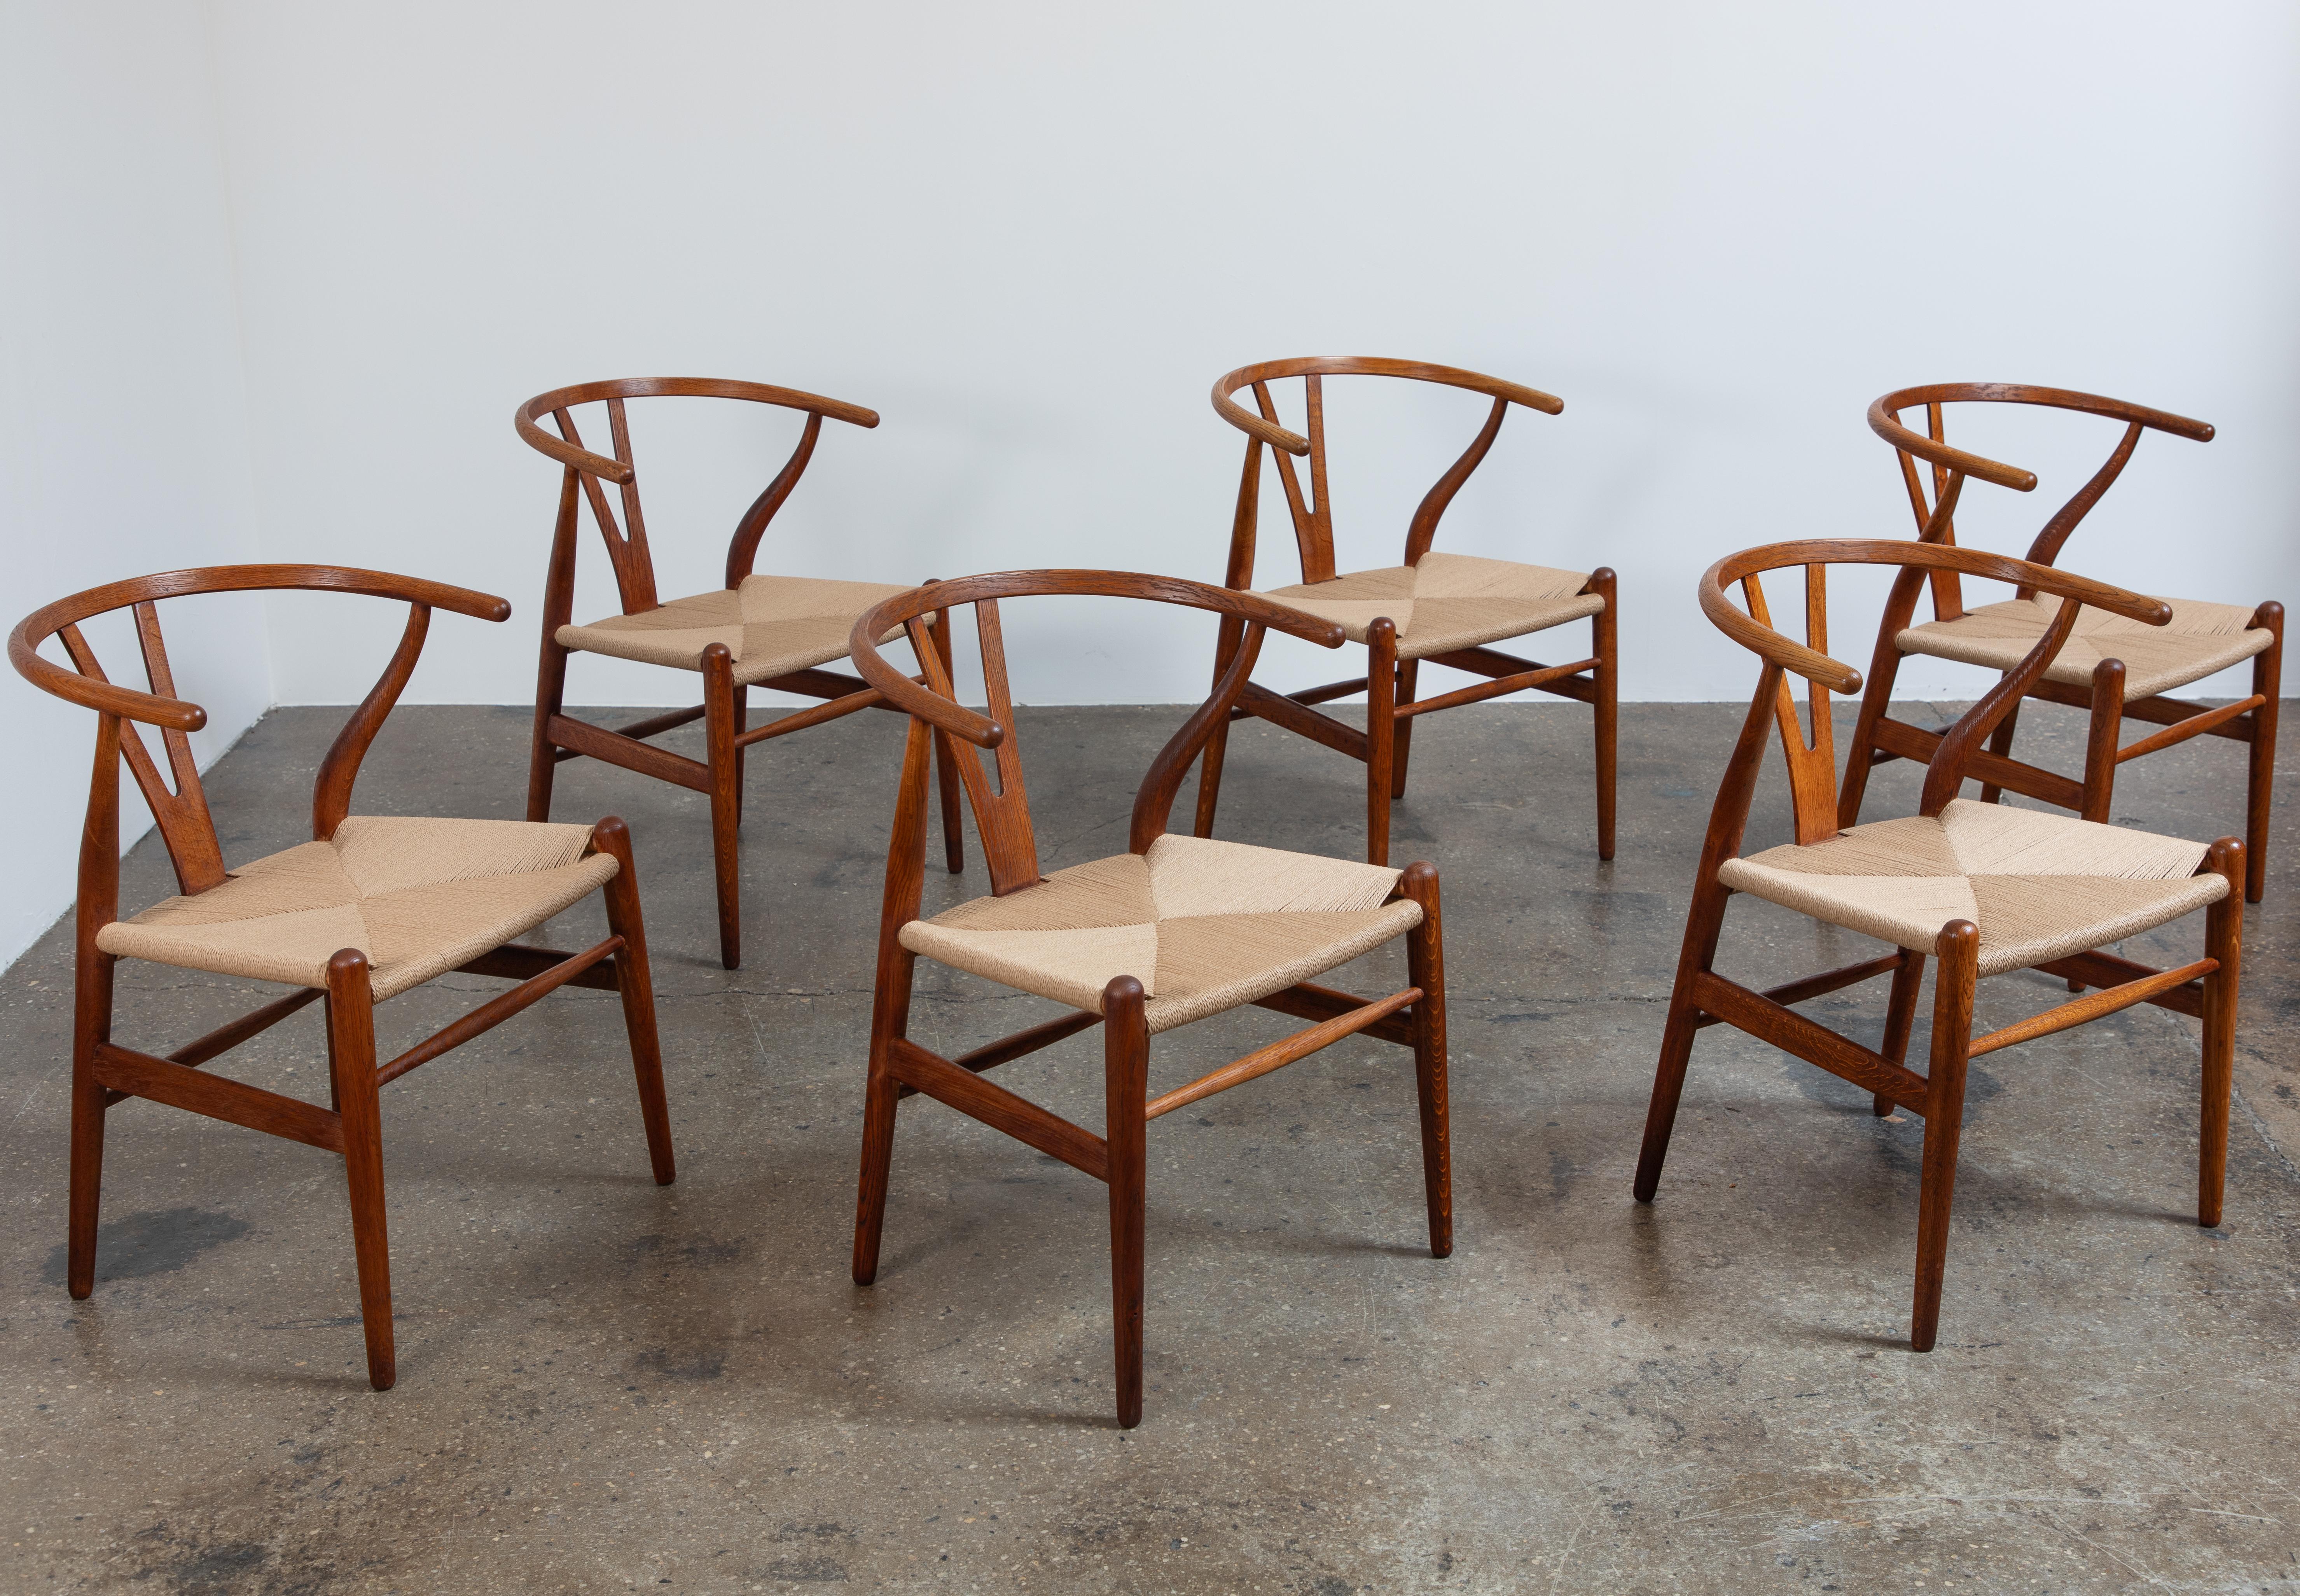 Set of six model CH-24 dining chairs, designed by Hans J. Wegner for Carl Hansen & Son. These iconic dining chairs combine seasoned elegance with fine craft.  Robust oak wood frame has aged nicely, with the wishbone “Y” backing and rounded armrests